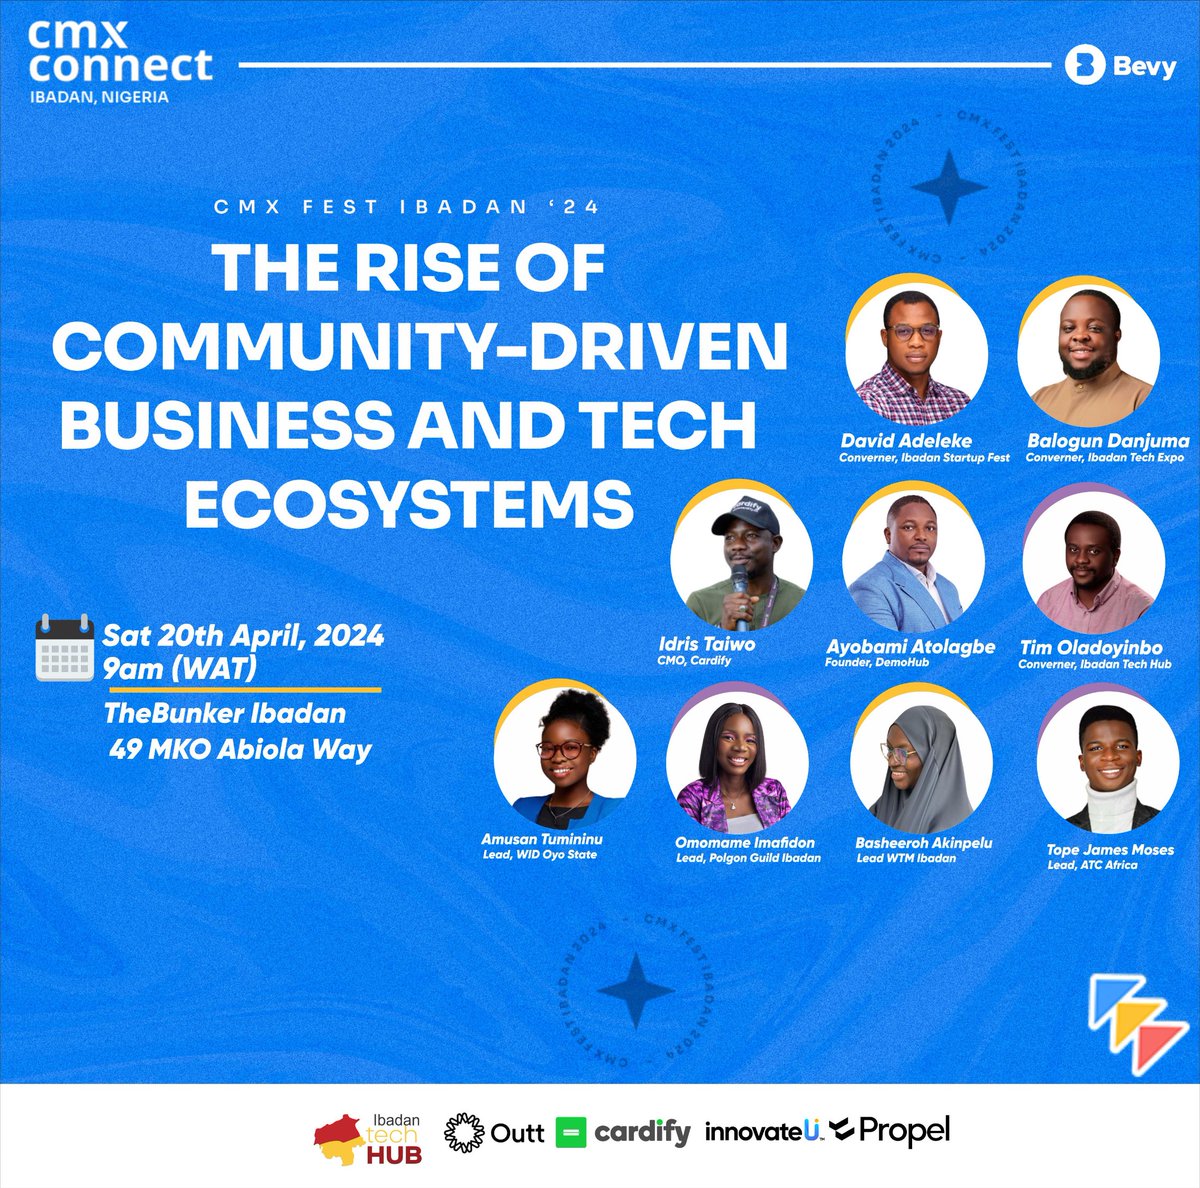 The CMX Festival Ibadan is here! Join us this Saturday as we discussed The Rise of Community Driven Business and Tech Ecosystems #CMXFestival #CommunityBuilding #Business #Ibadan